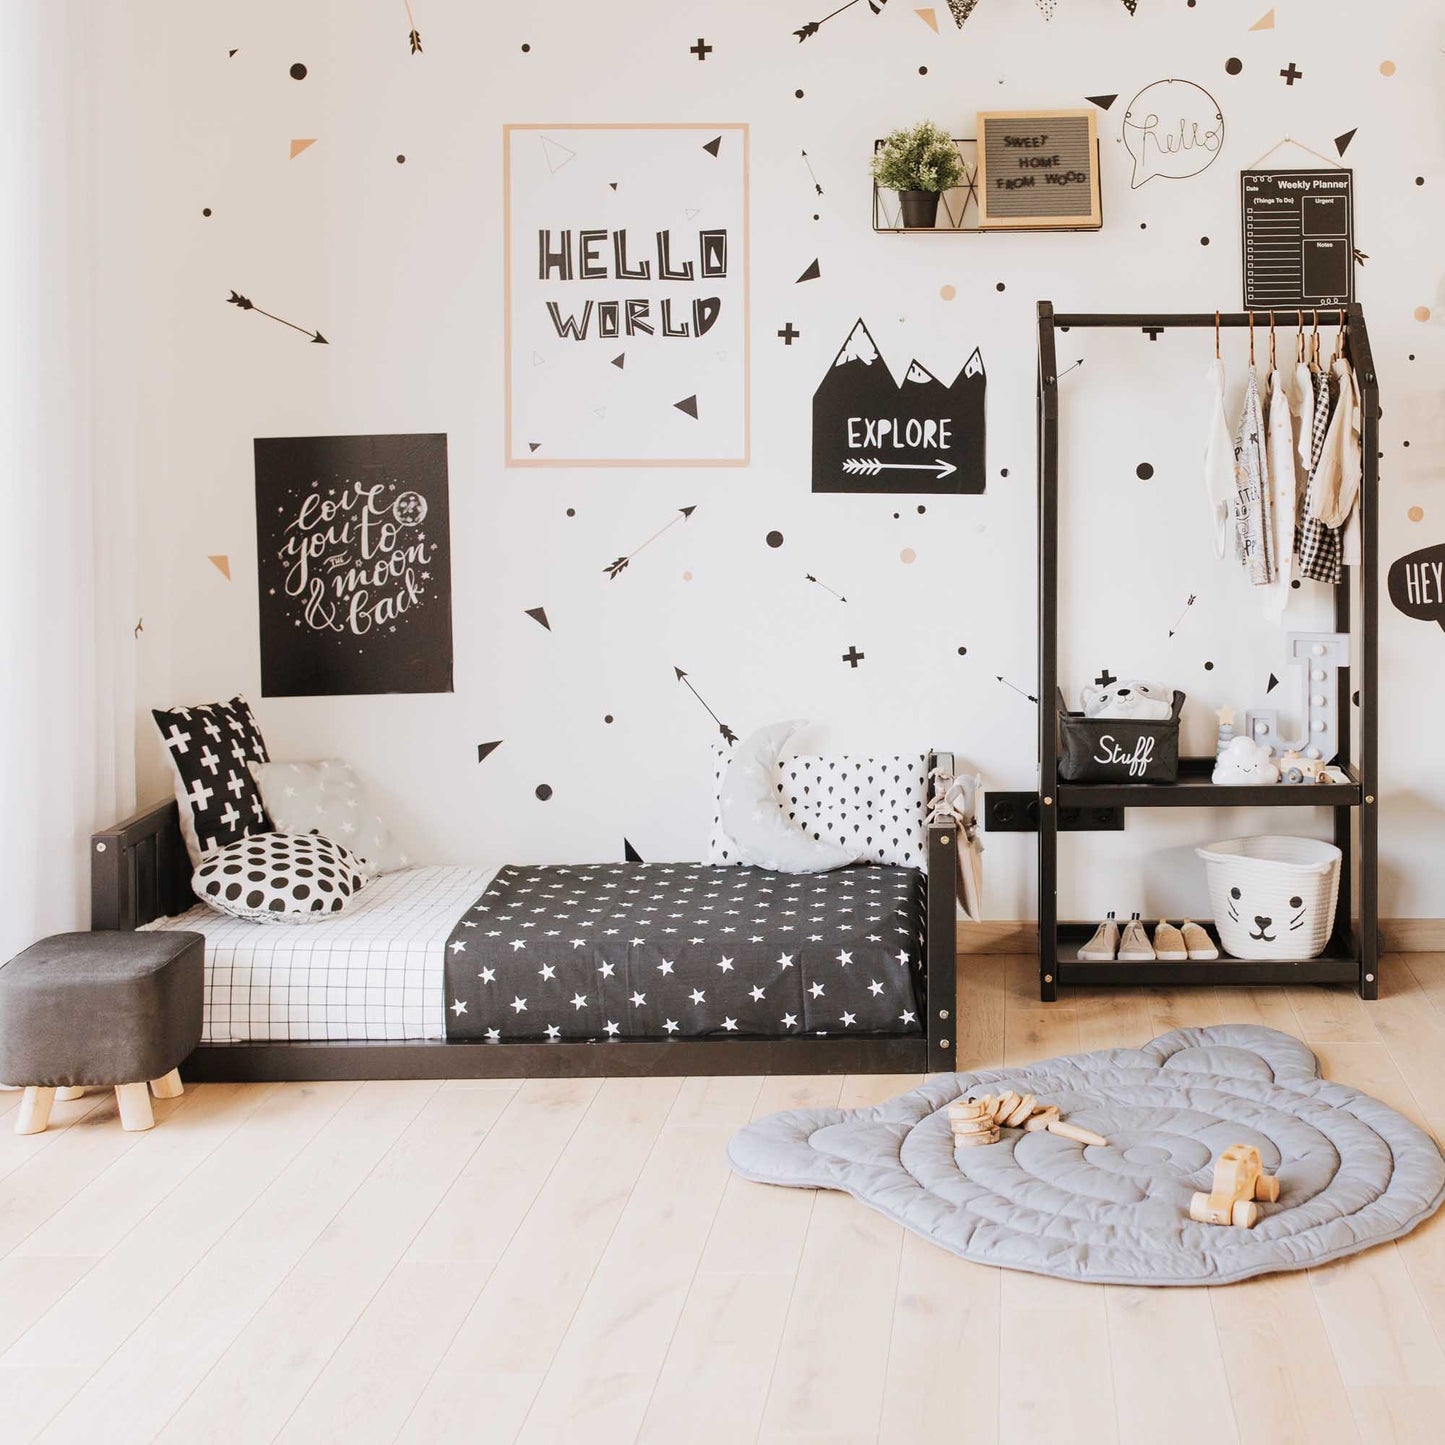 A black and white children's room with polka dots on the wall, featuring a Sweet Home From Wood kids' bed with a headboard and footboard.